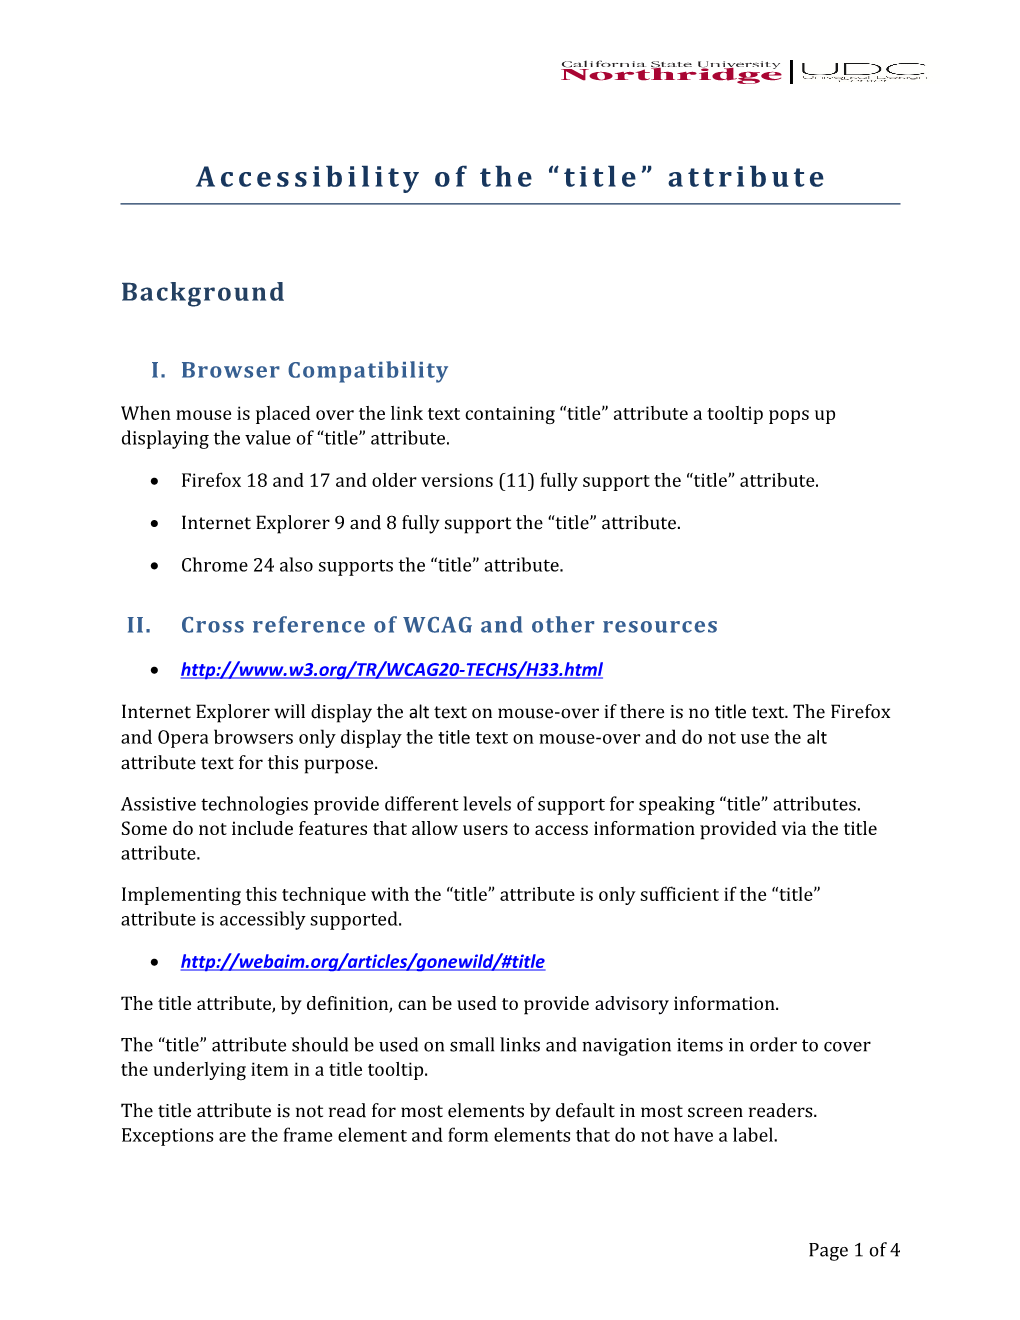 Accessibility of the Title Attribute